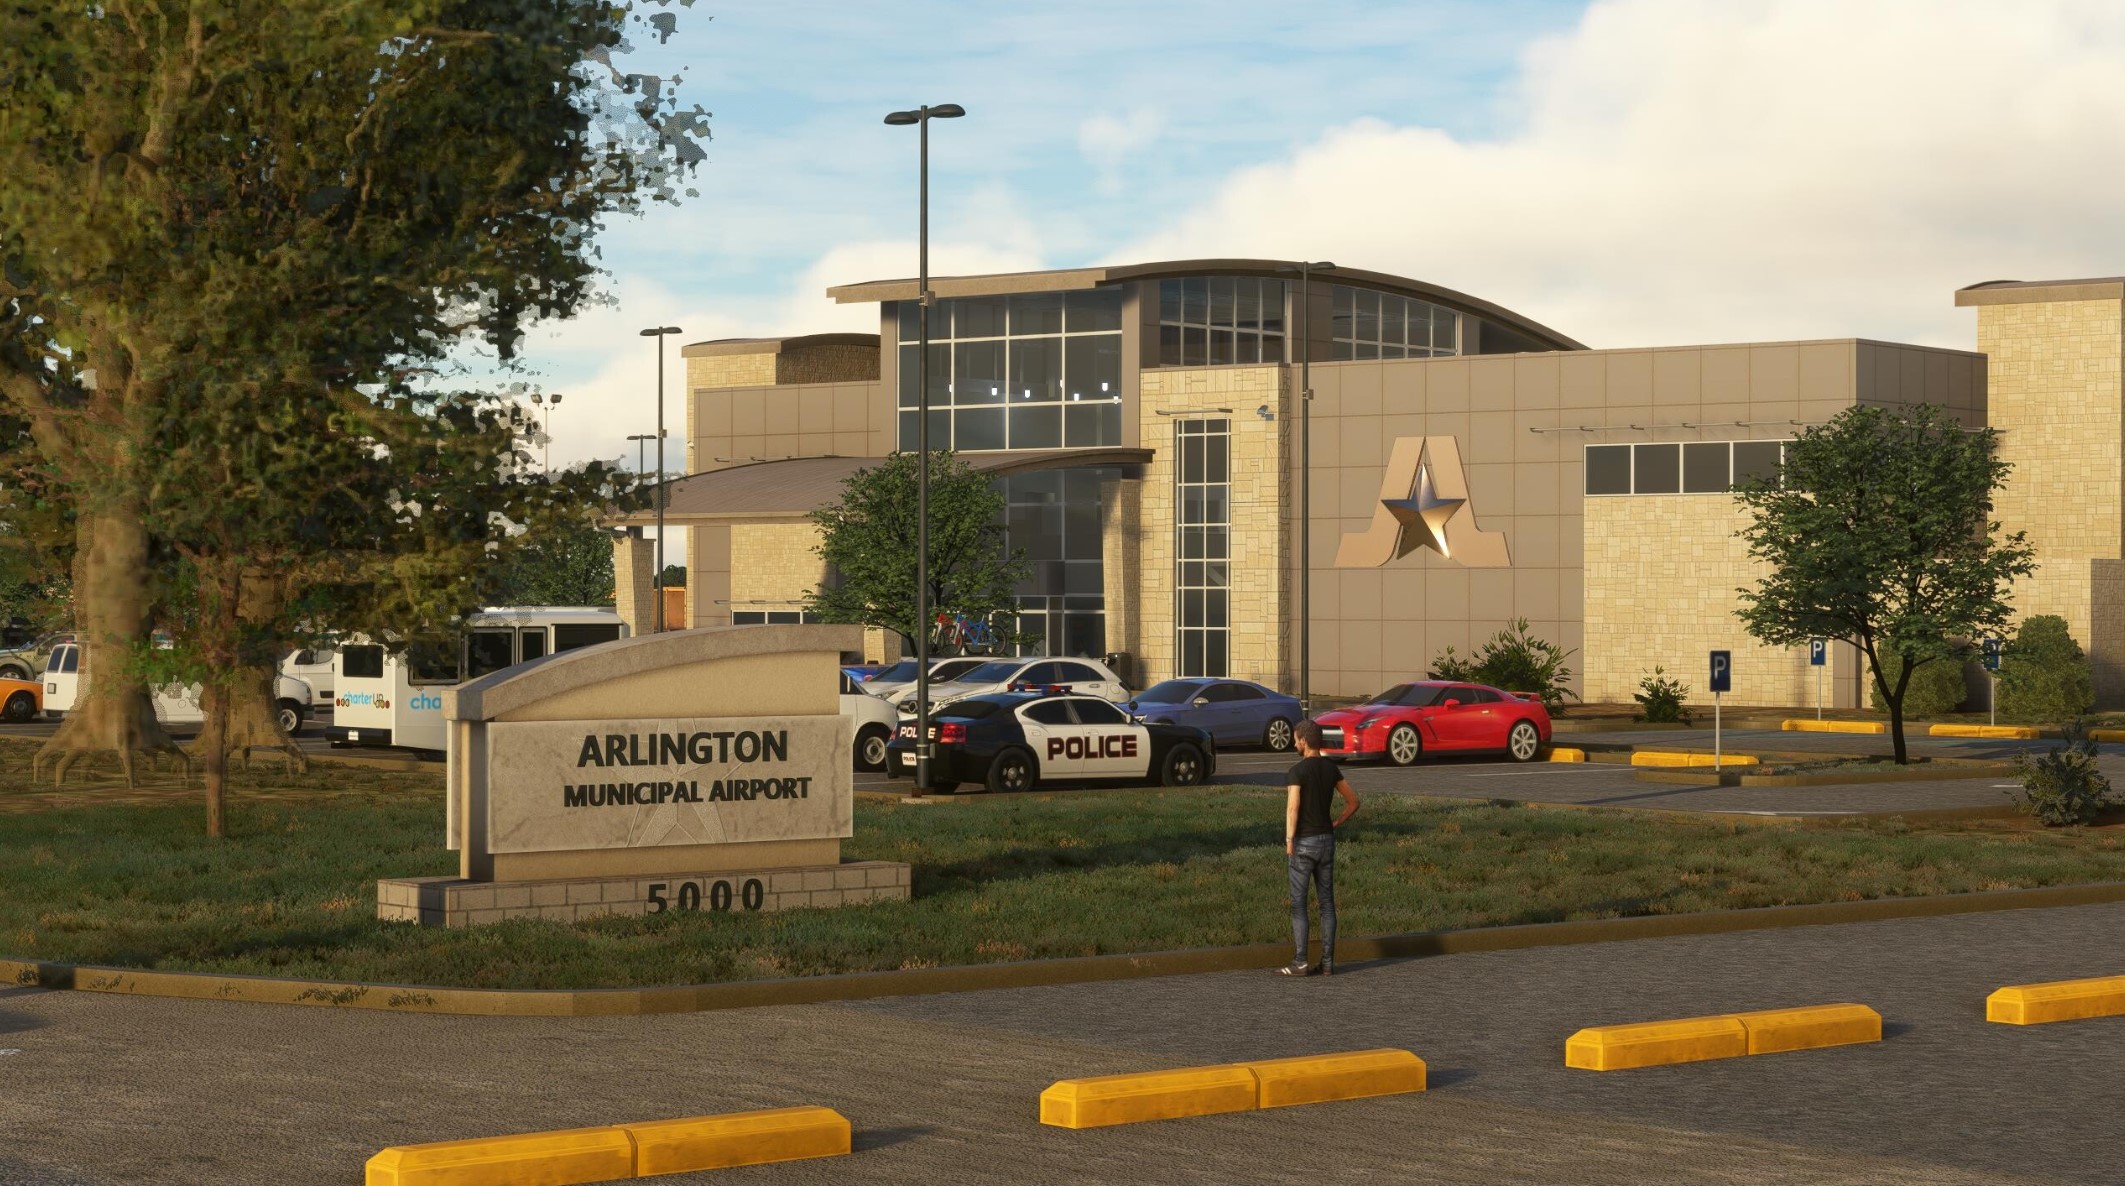 BMWorld and AmSim Release Arlington Municipal Airport for MSFS